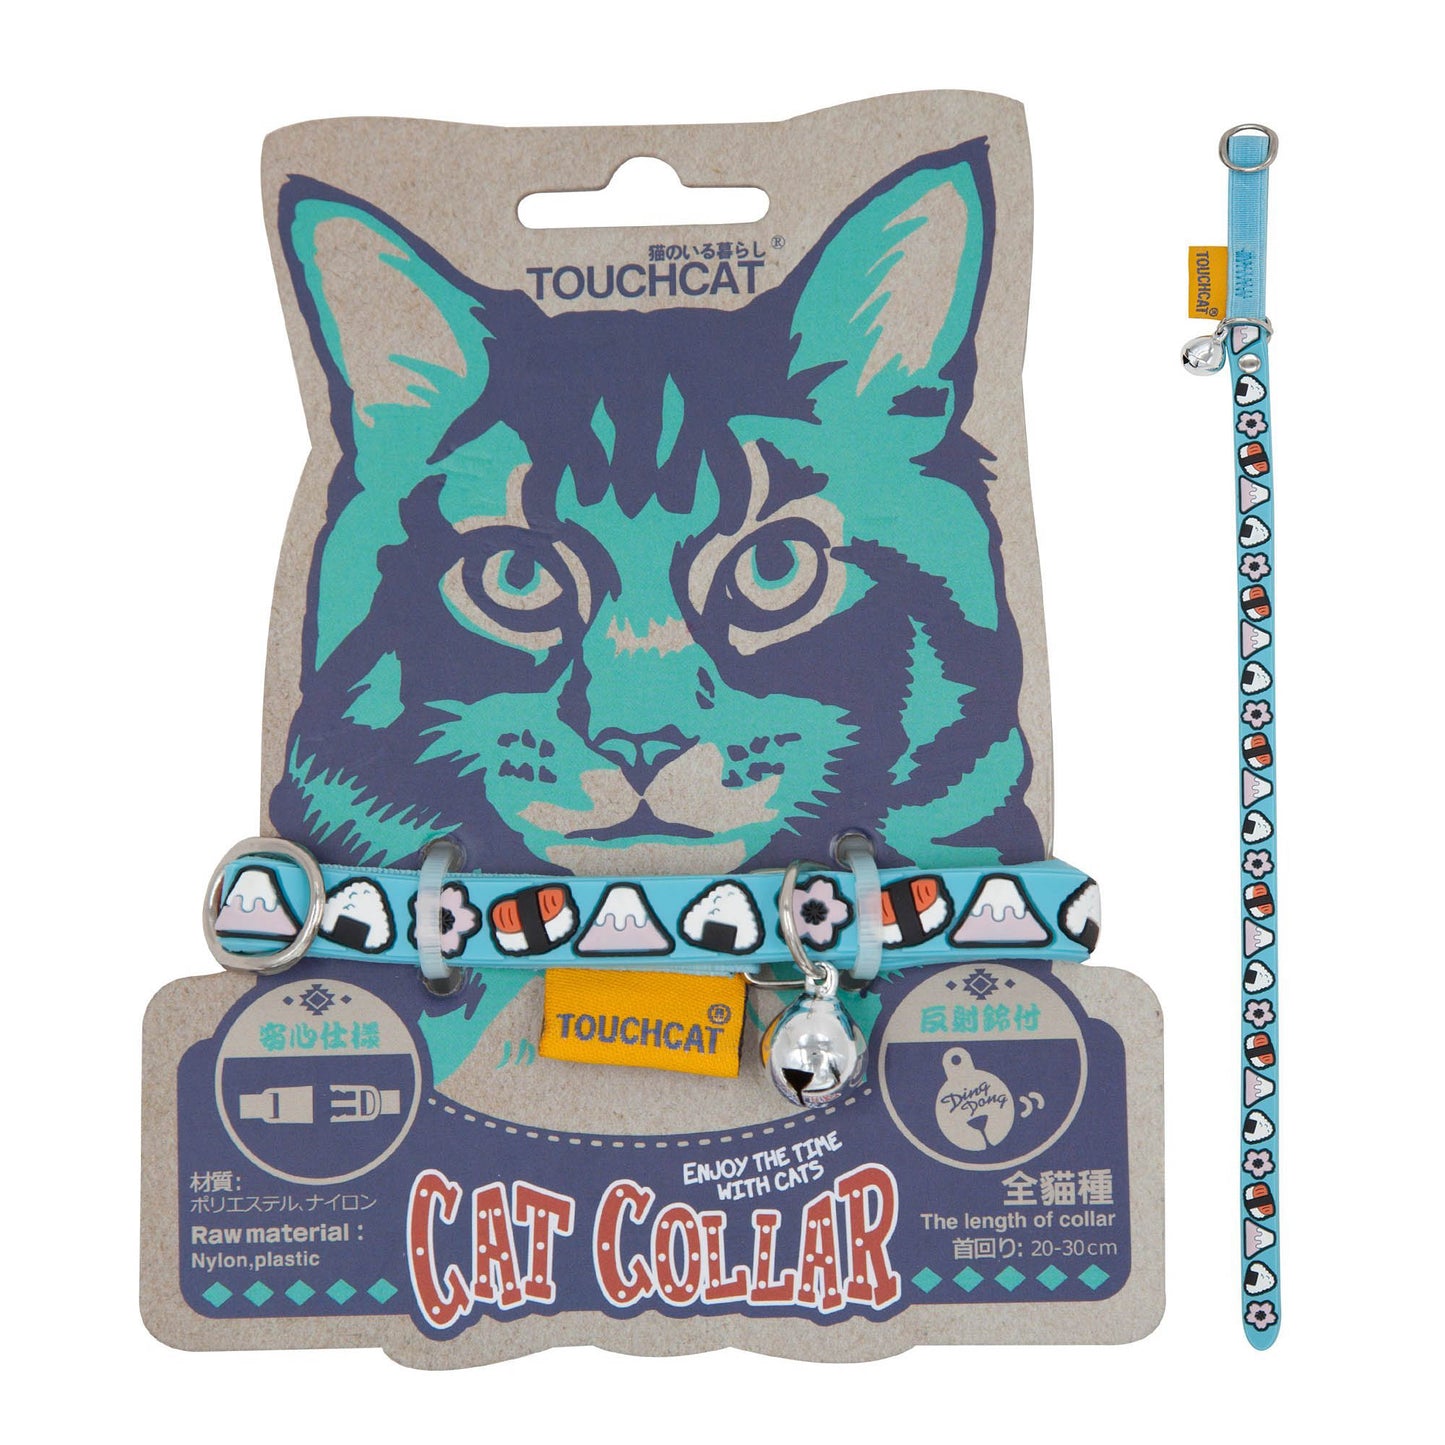 Designer Rubberized Cat Collar with Bell